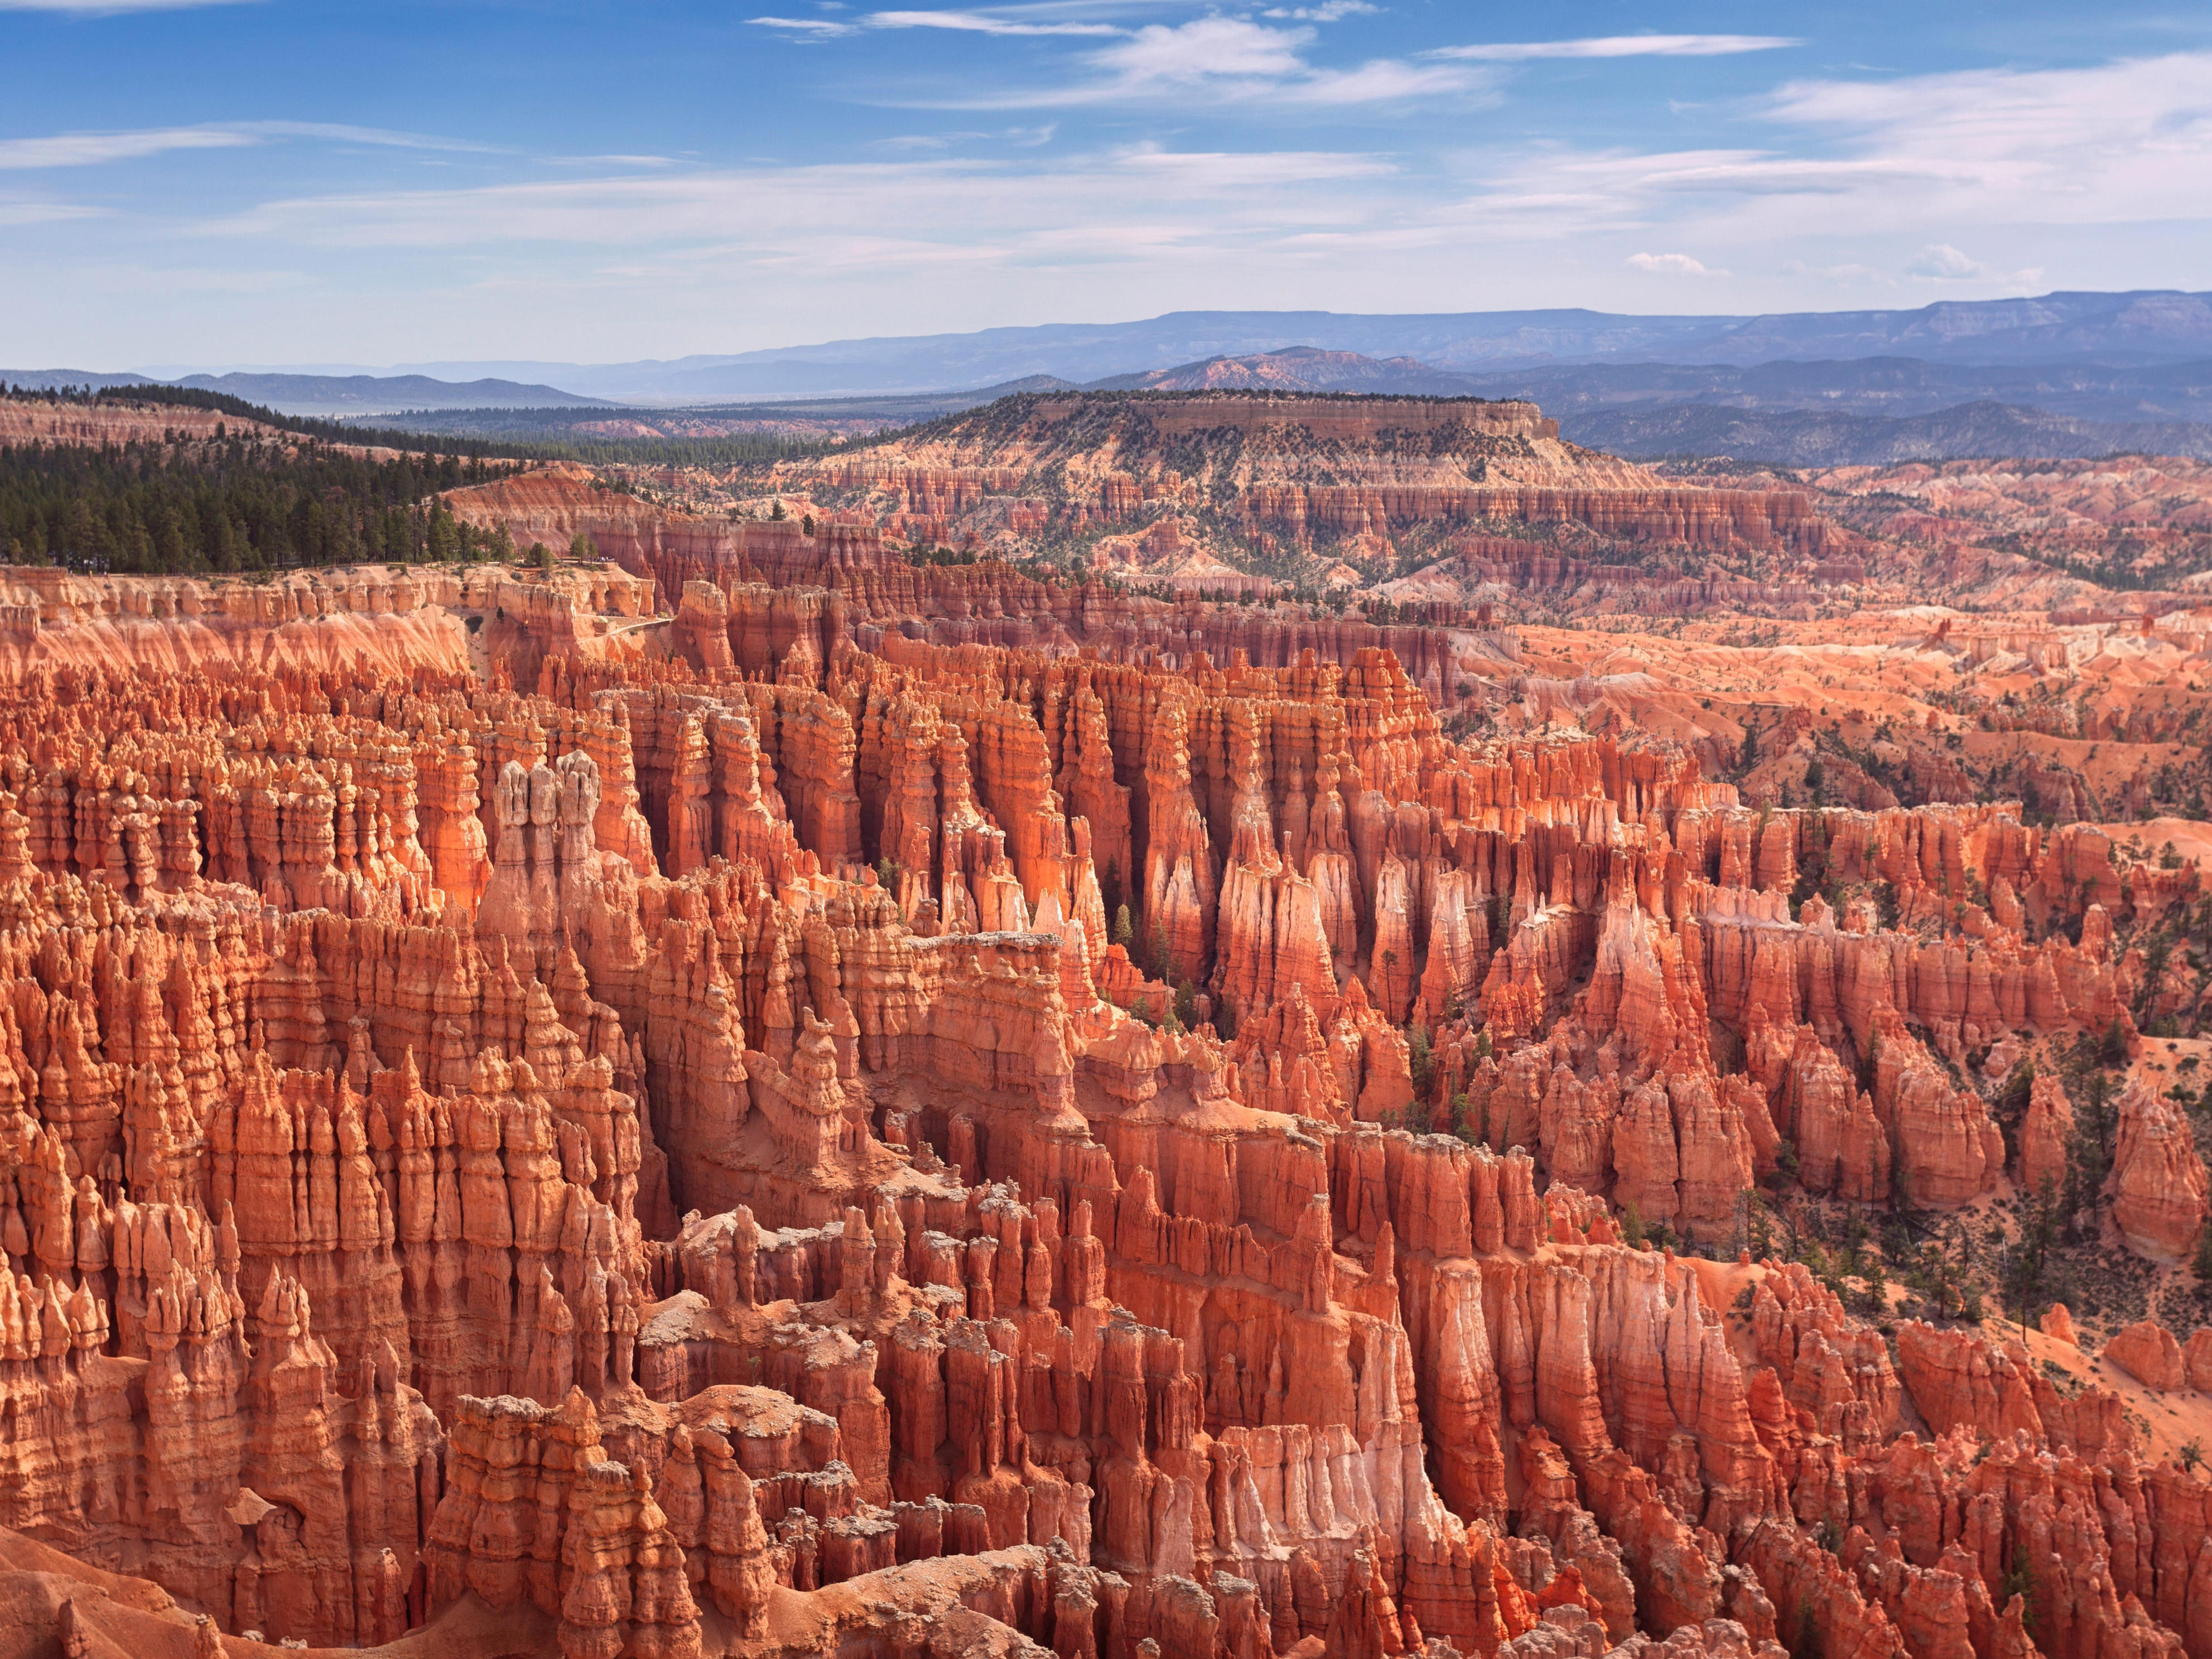 <p>Bryce Canyon National Park is one of my favorite parks I've explored. I first visited in 2014 for an undergraduate geology class and was blown away by the stunning rock formations called <a href="https://www.nps.gov/brca/learn/nature/hoodoos.htm">hoodoos</a>.</p><p>Seeing the array of orange and red rocks in person was an experience I'll never forget.</p>